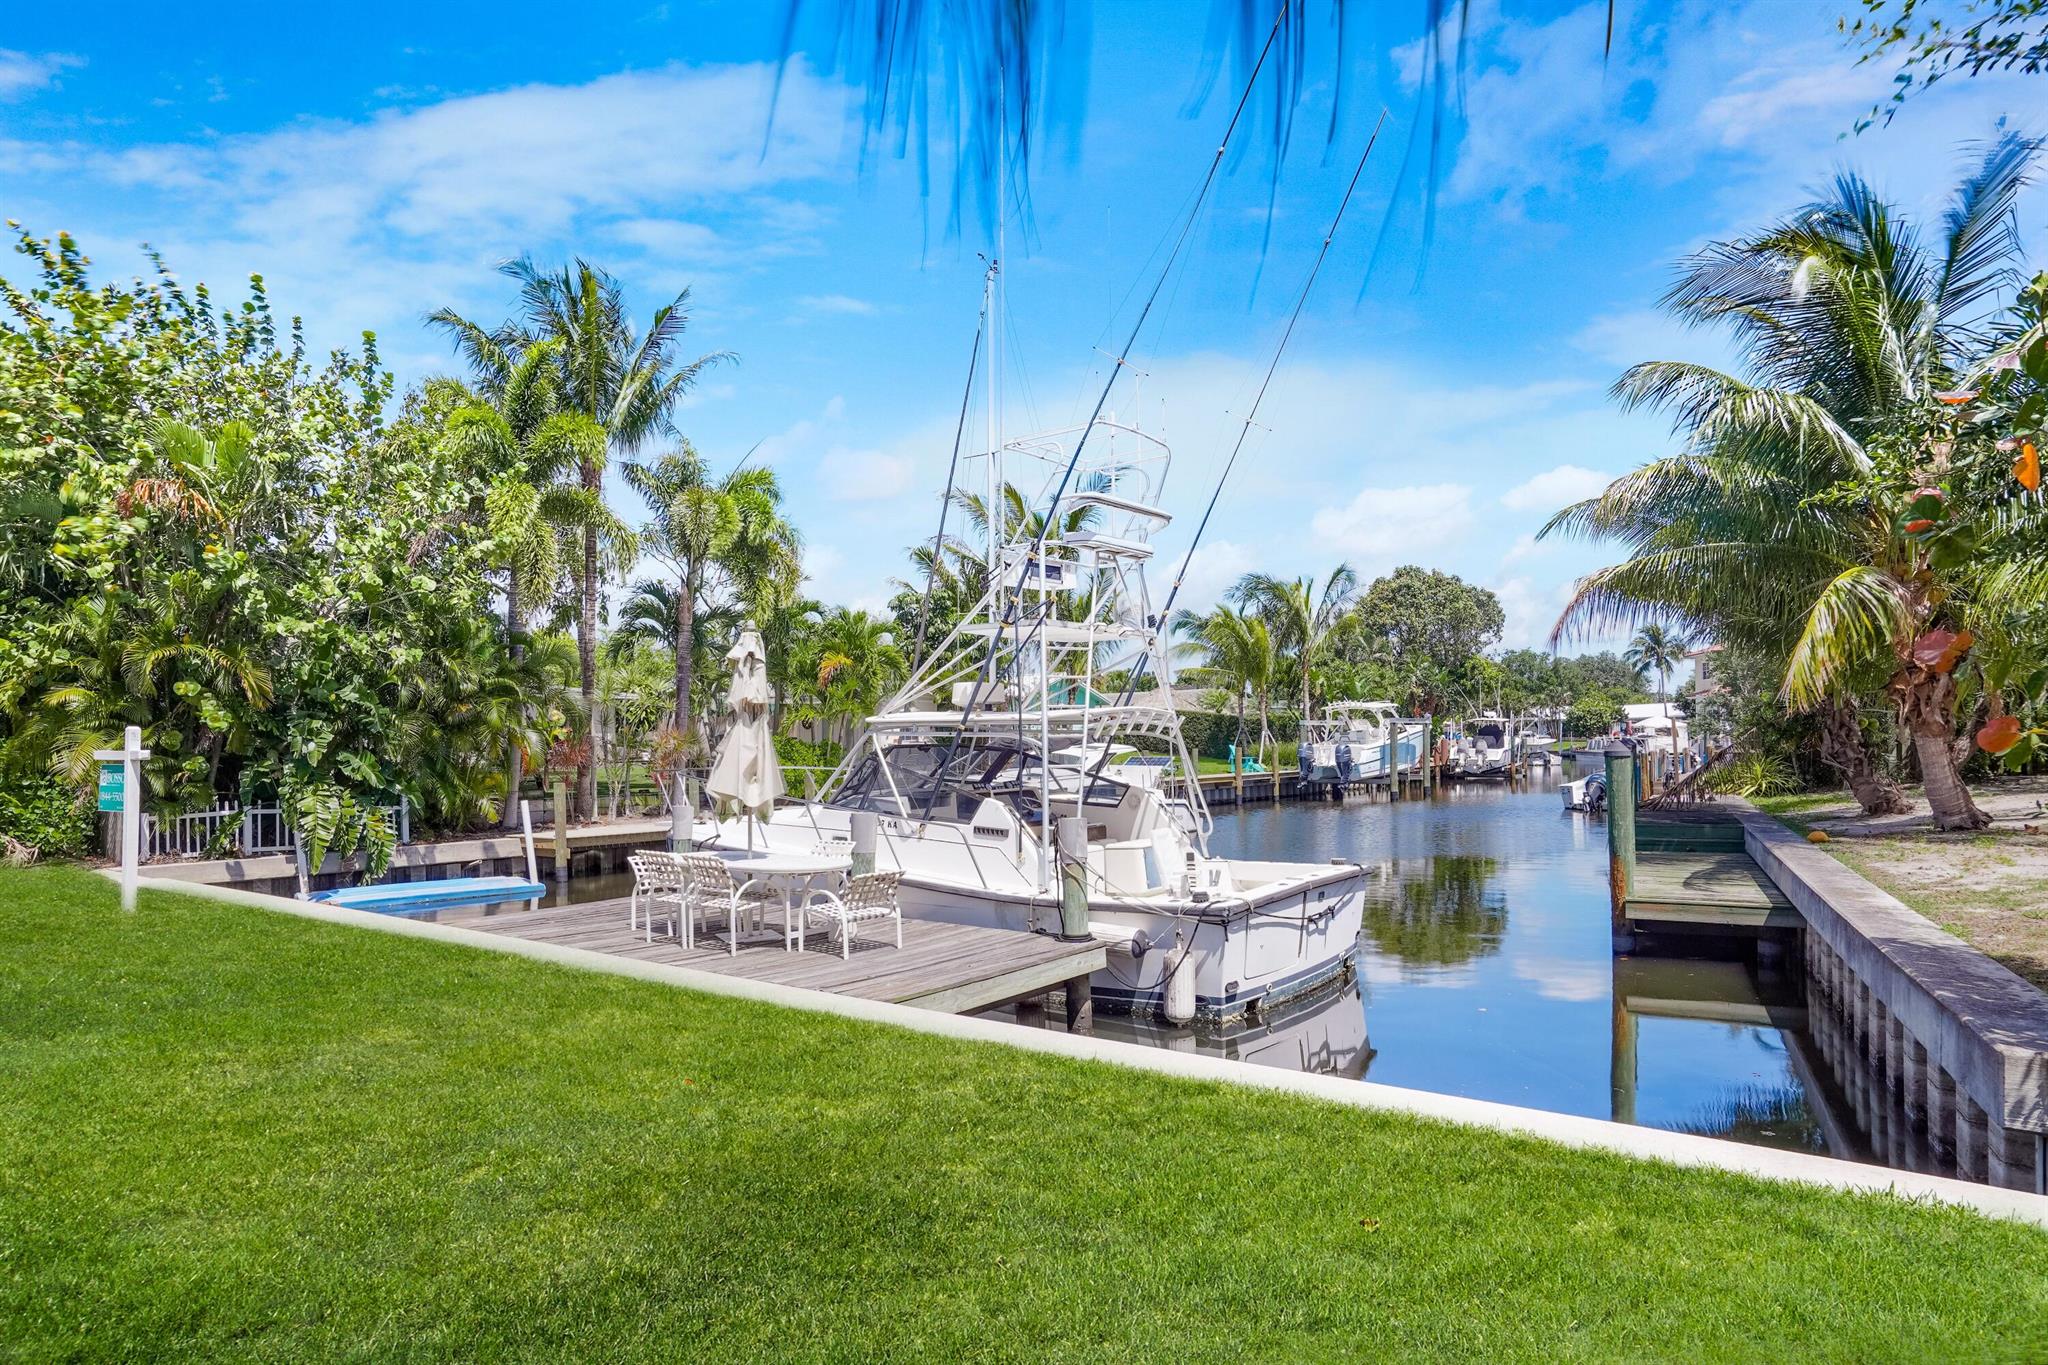 Build your dream waterfront home with intracoastal and ocean access and no fixed bridges. This unique lot looks directly down the canal framed by Palm Trees and boats highlighting it's old Florida charm. 83' of waterfront with private dock that can accommodate boats up to 35'. Paradise Port is a cozy boat-friendly community with no HOA fees! Other features of the property include a well maintained seawall and room for a beautiful circular driveway. AC is not working in Duplex. Minutes to everything Juno Beach, Jupiter and downtown Palm Beach Gardens has to offer. Minutes to 1-95 and 25 minutes from PBI airport - this is the boaters paradise location you've been dreaming of. Walking &/or  distance to the beach, restaurants.